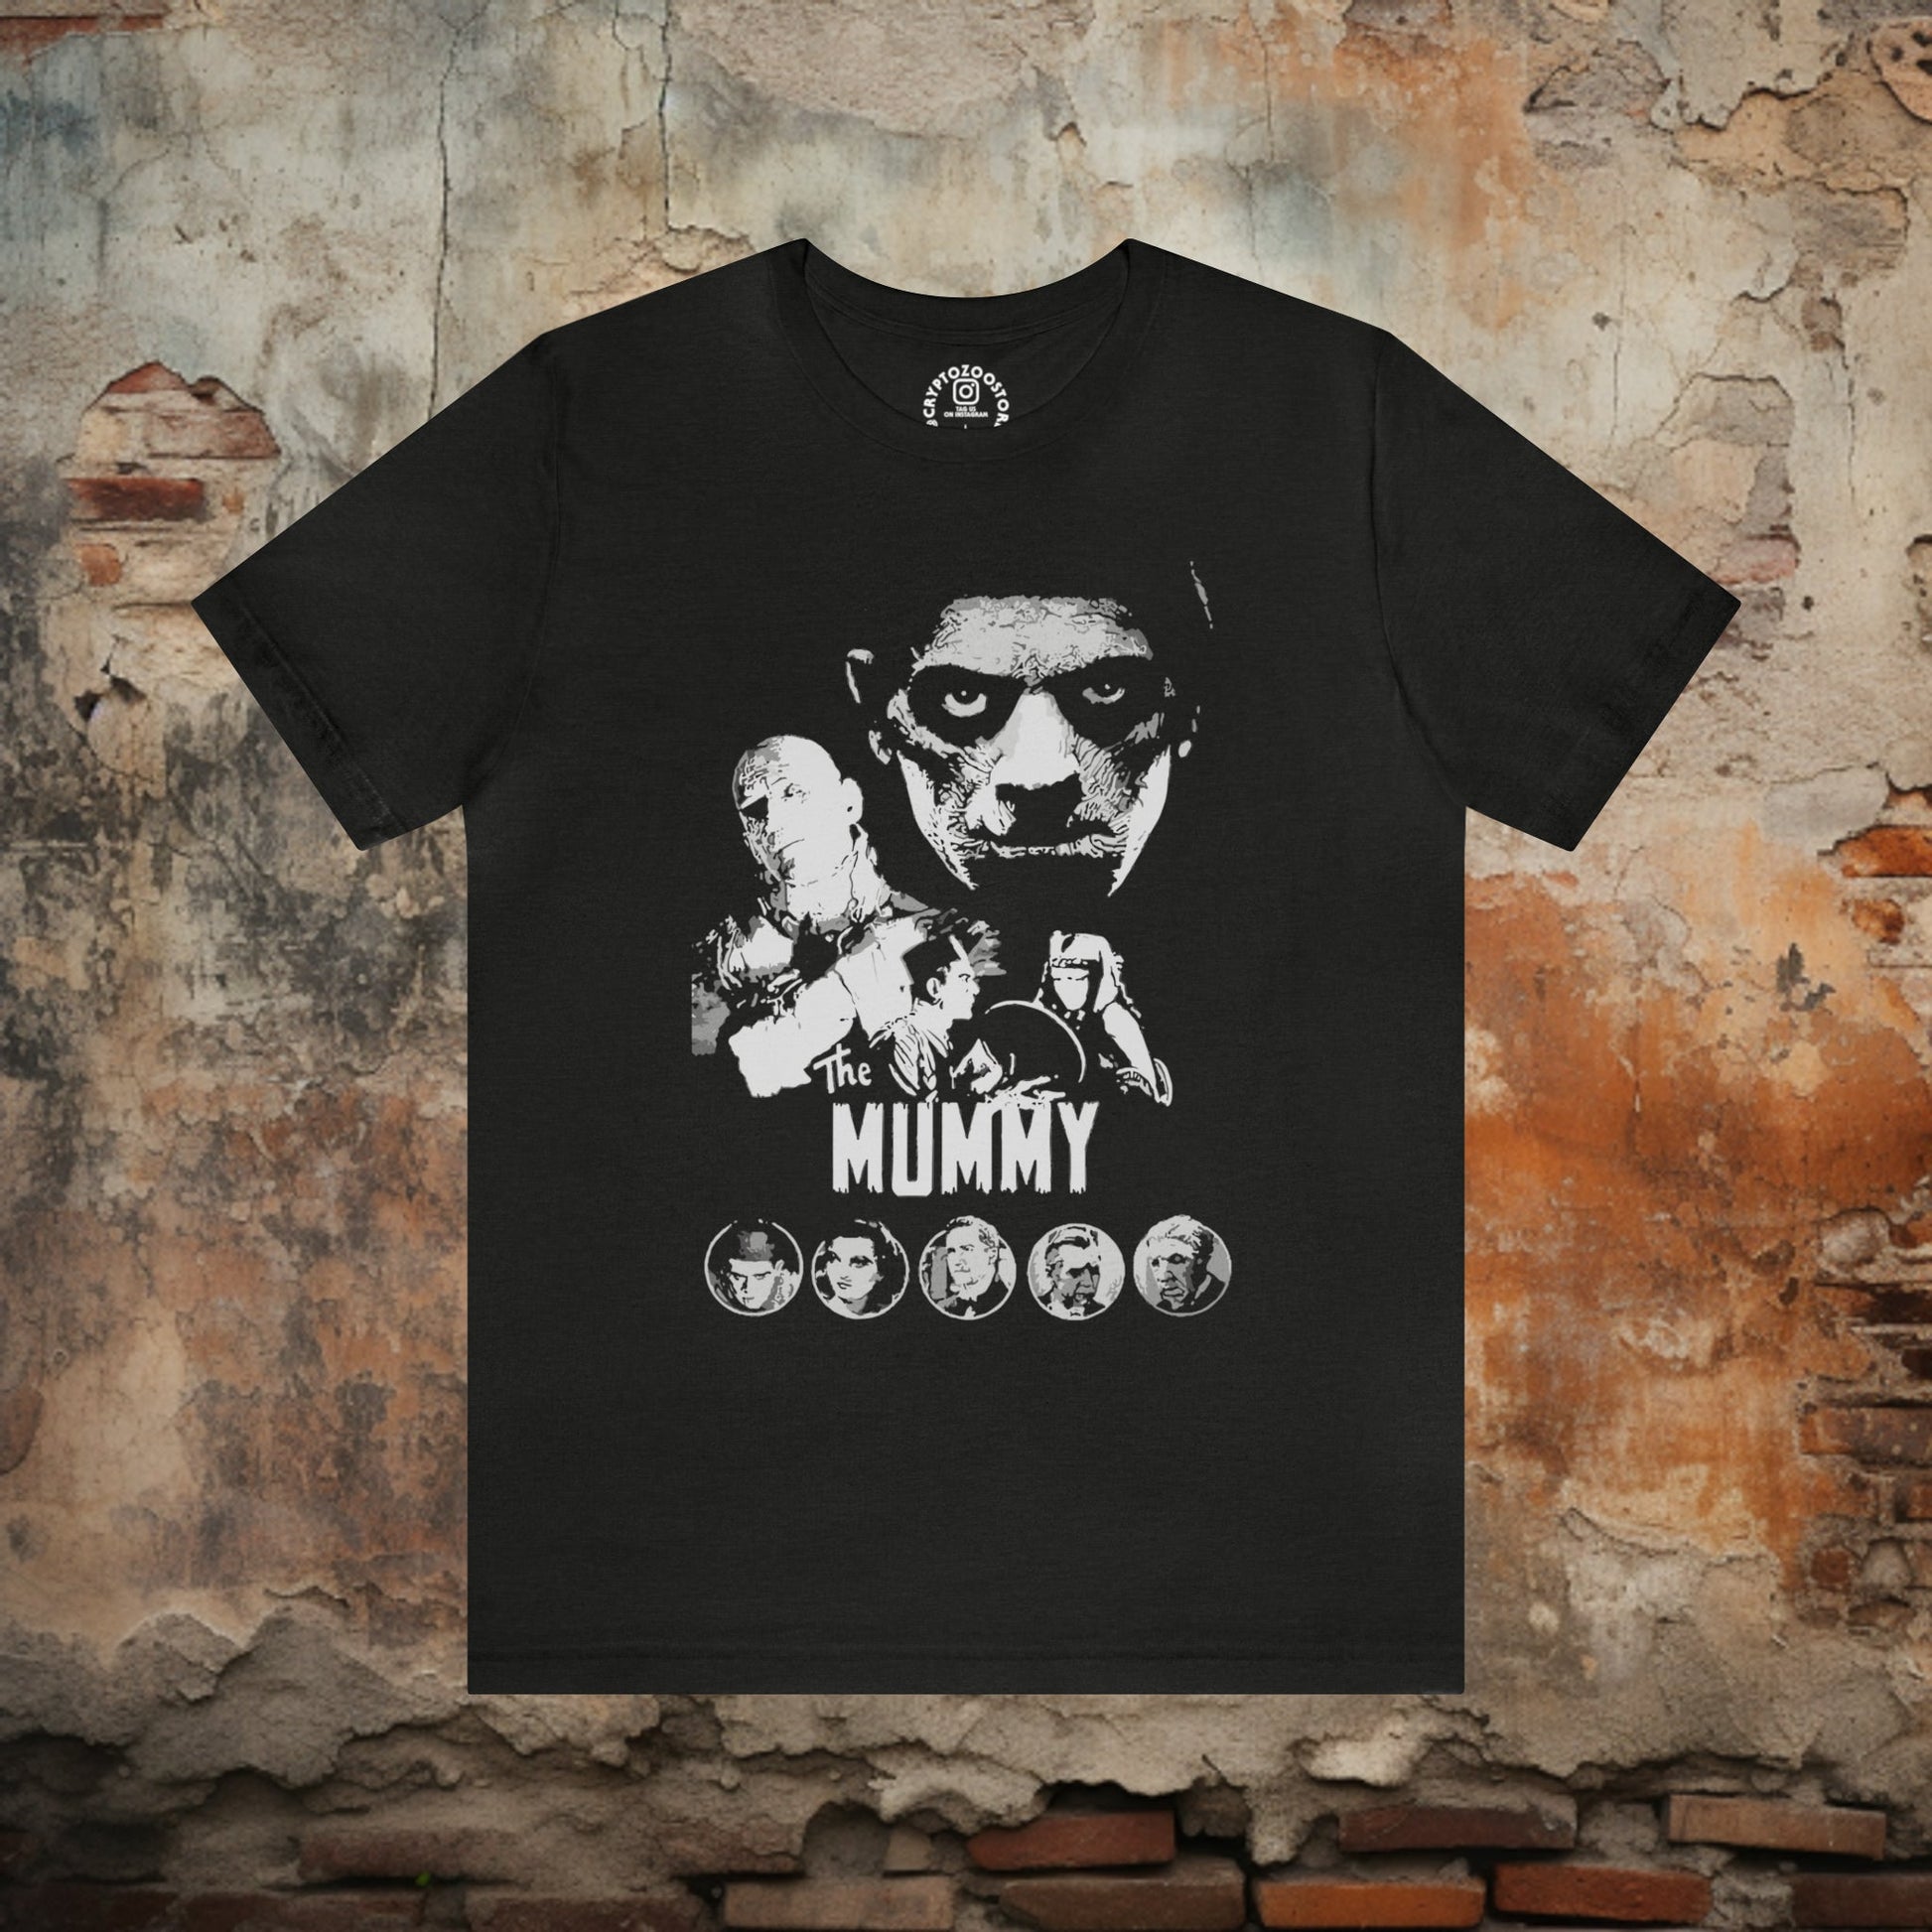 T-Shirt - The Mummy Shirt: Soft-Cotton T-shirt - Classic Horror Movie Tee from Crypto Zoo Tees